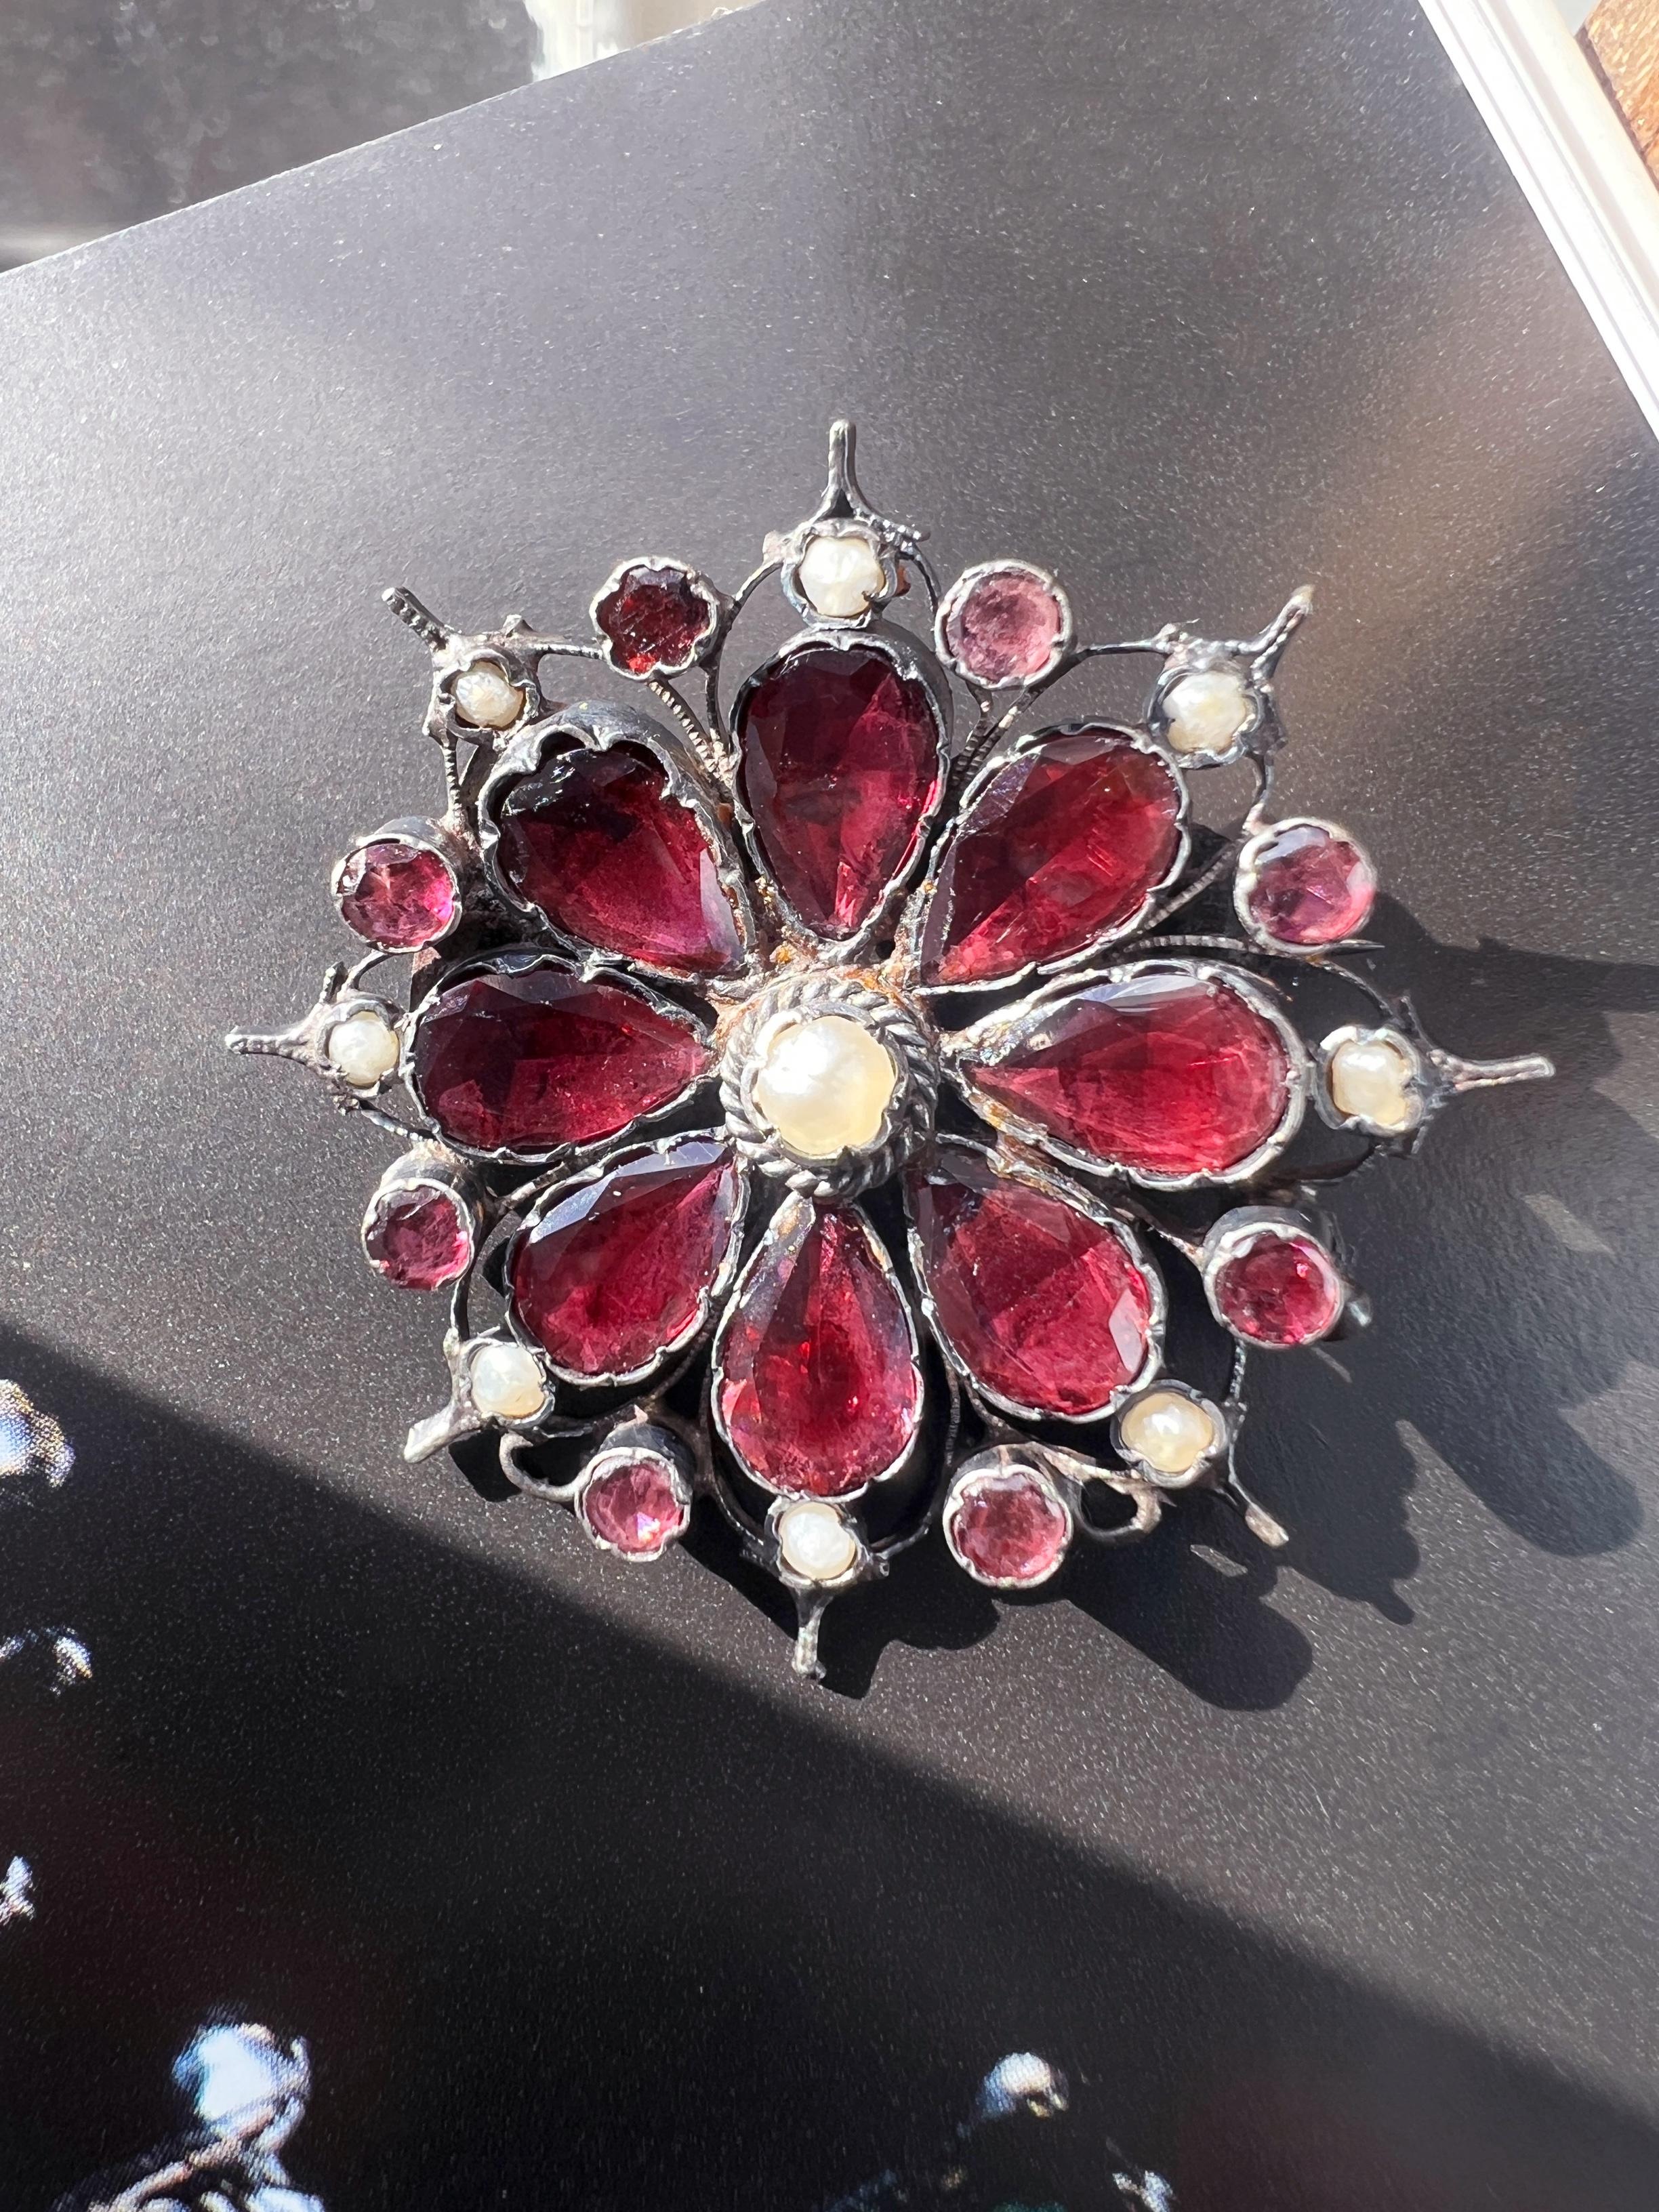 Introducing a stunning early 19th-century flower brooch. This lovely piece of jewelry features 8 delicate petals made of pinkish-red garnets, which are in flat cut style and mounted in silver with closed backings. Those characteristics are typical